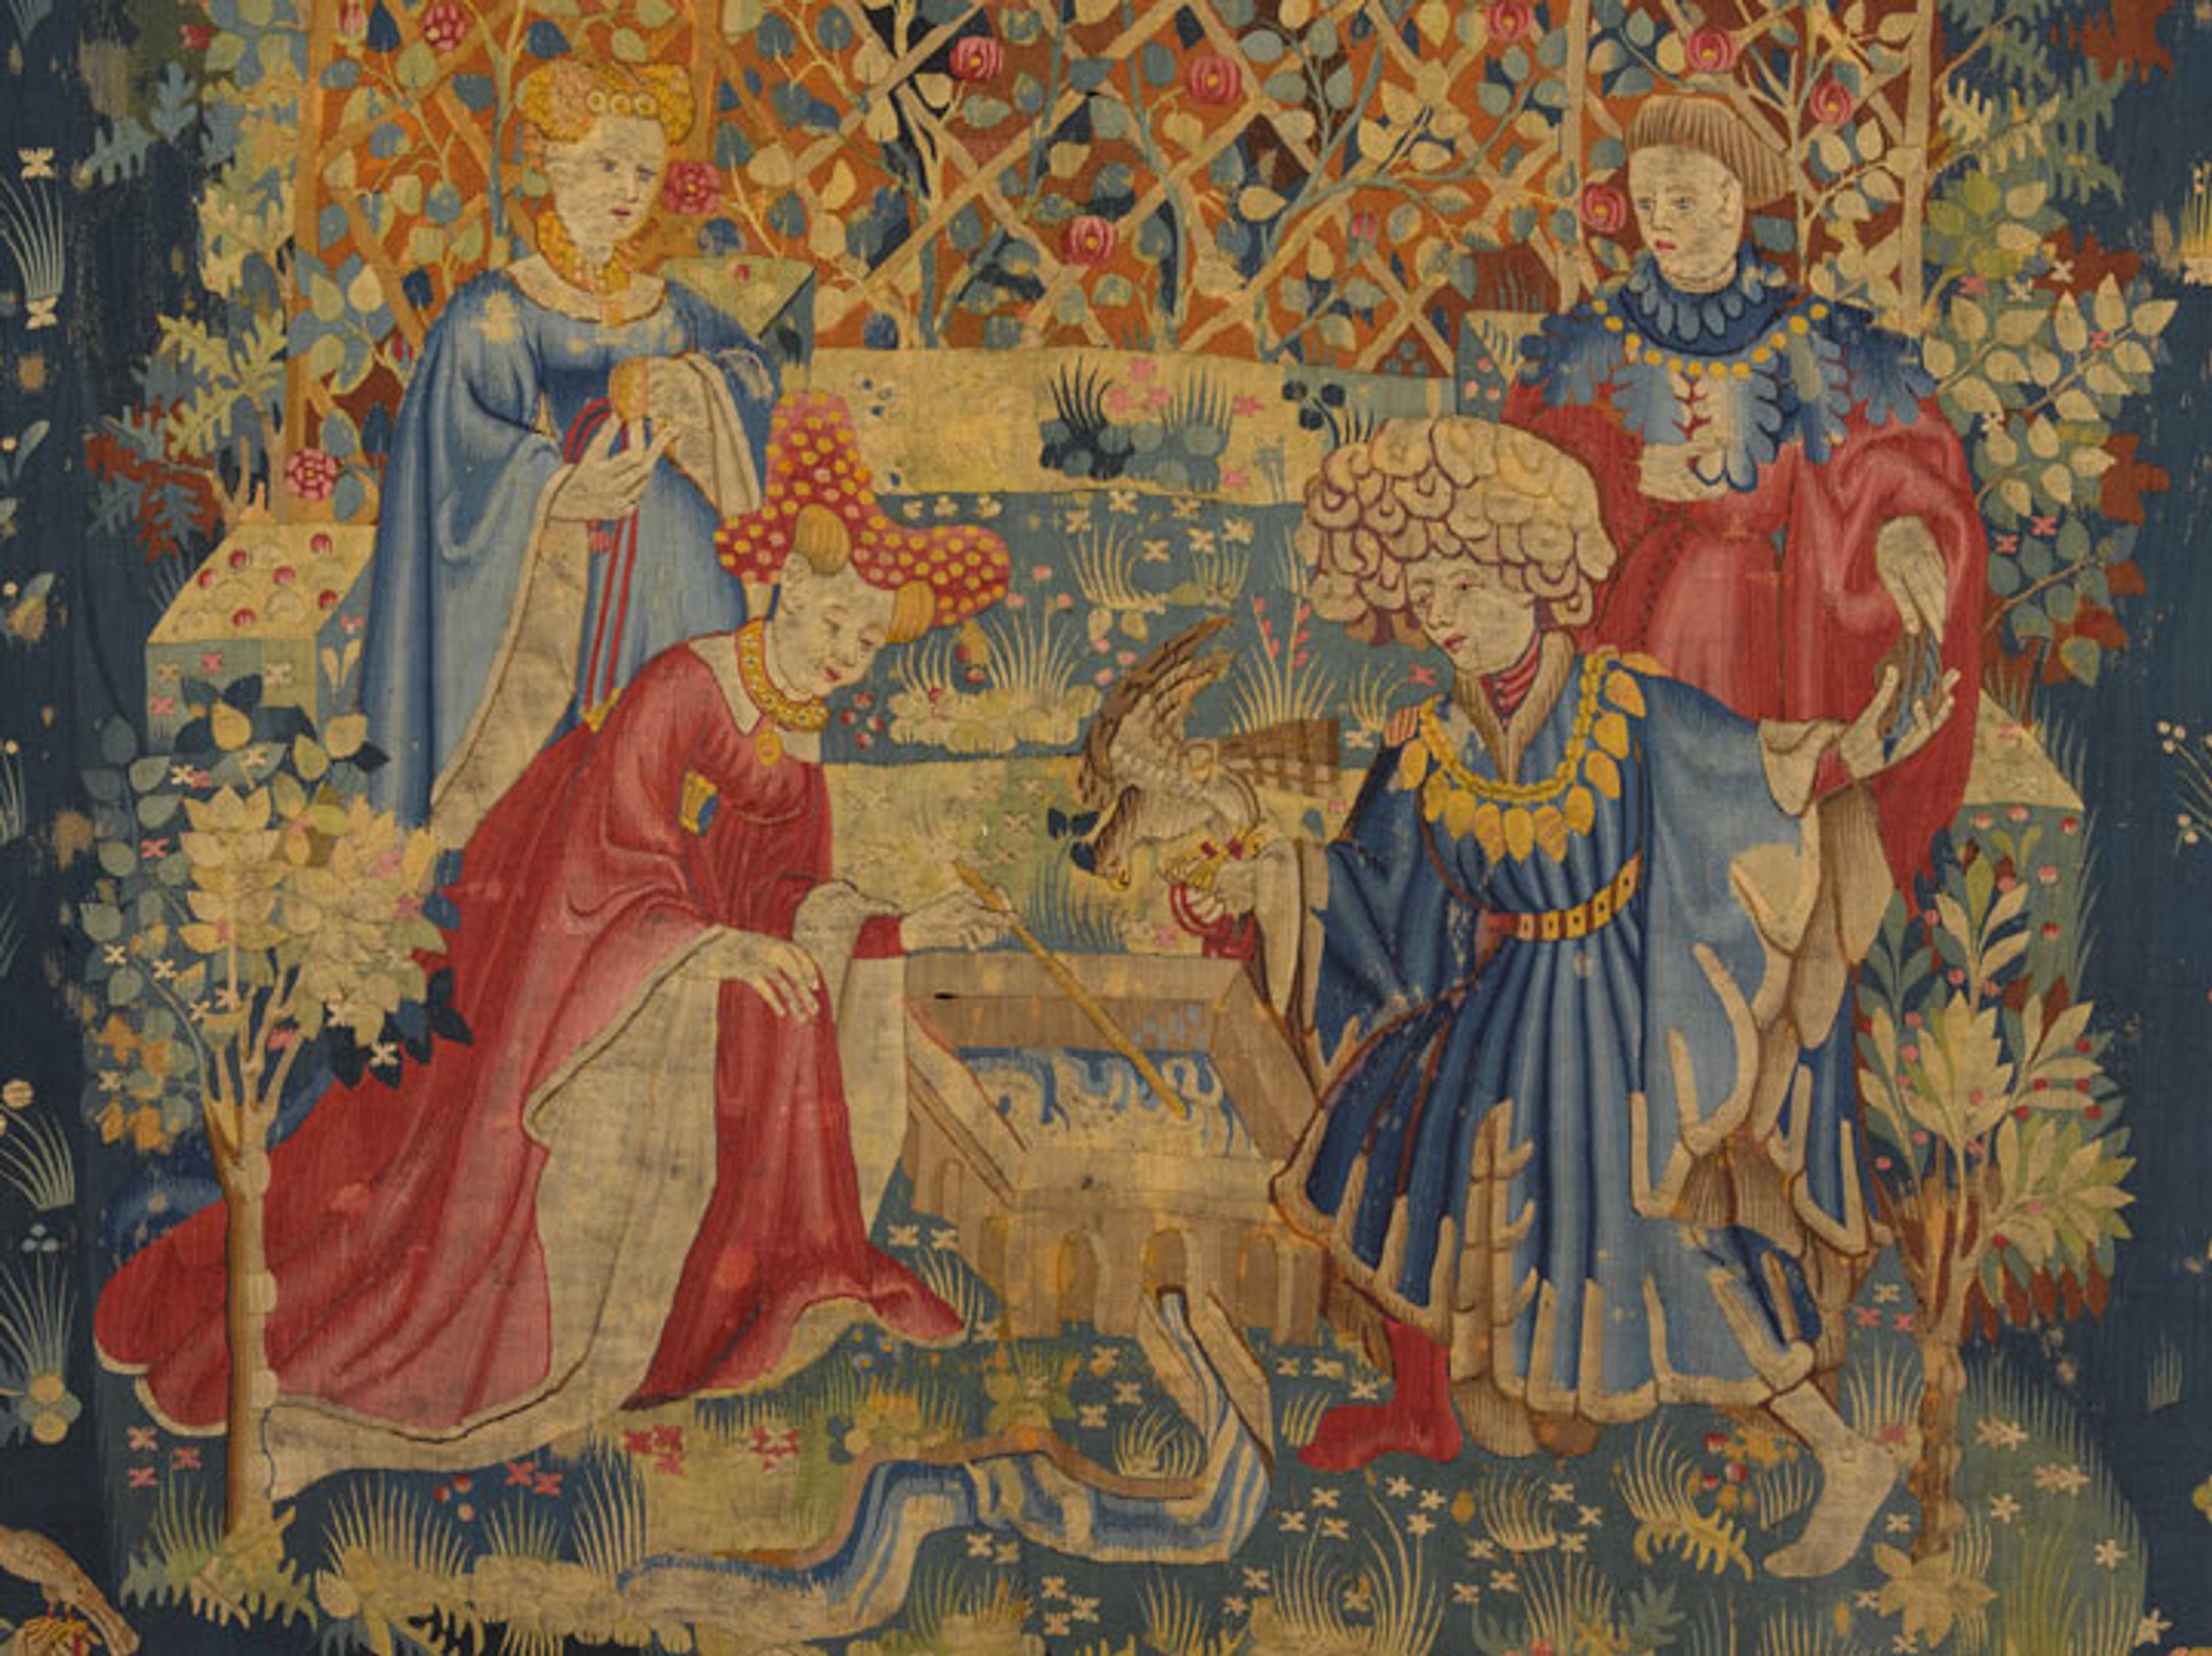 A man and woman, along with their attendants, are in the center of a tapestry on either side of a basin of water